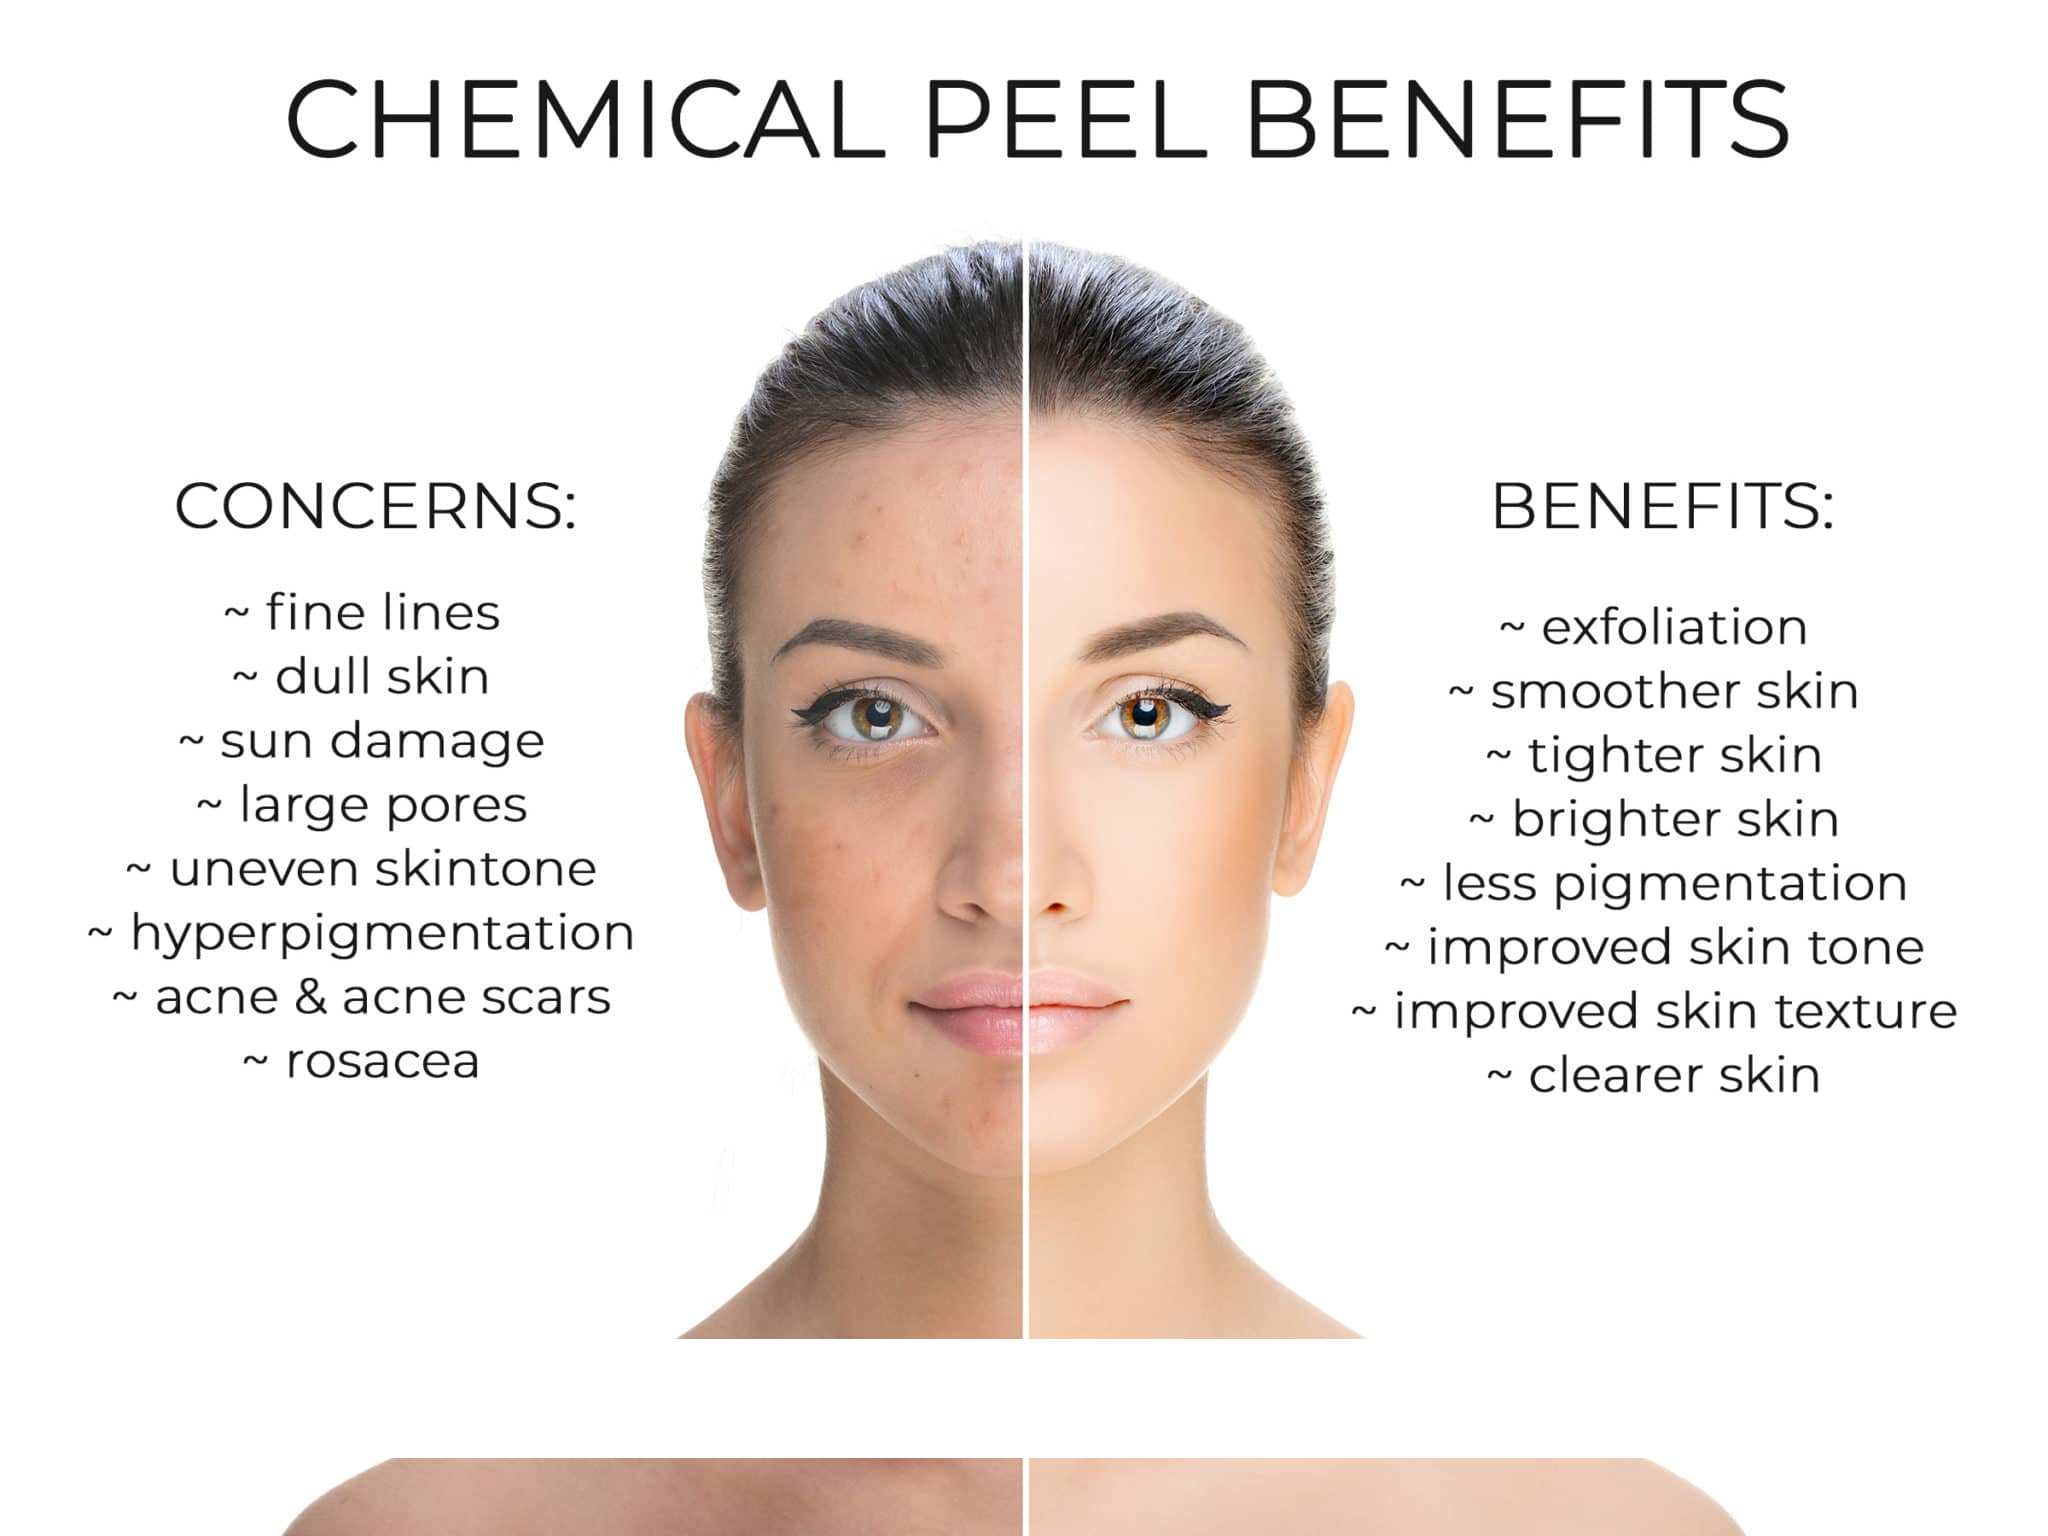 The Peel Deal - The Risks And The Benefits Of Chemical Skin Peels — Lumiere  Medispa - Skin Health & Rejuvenation Clinic